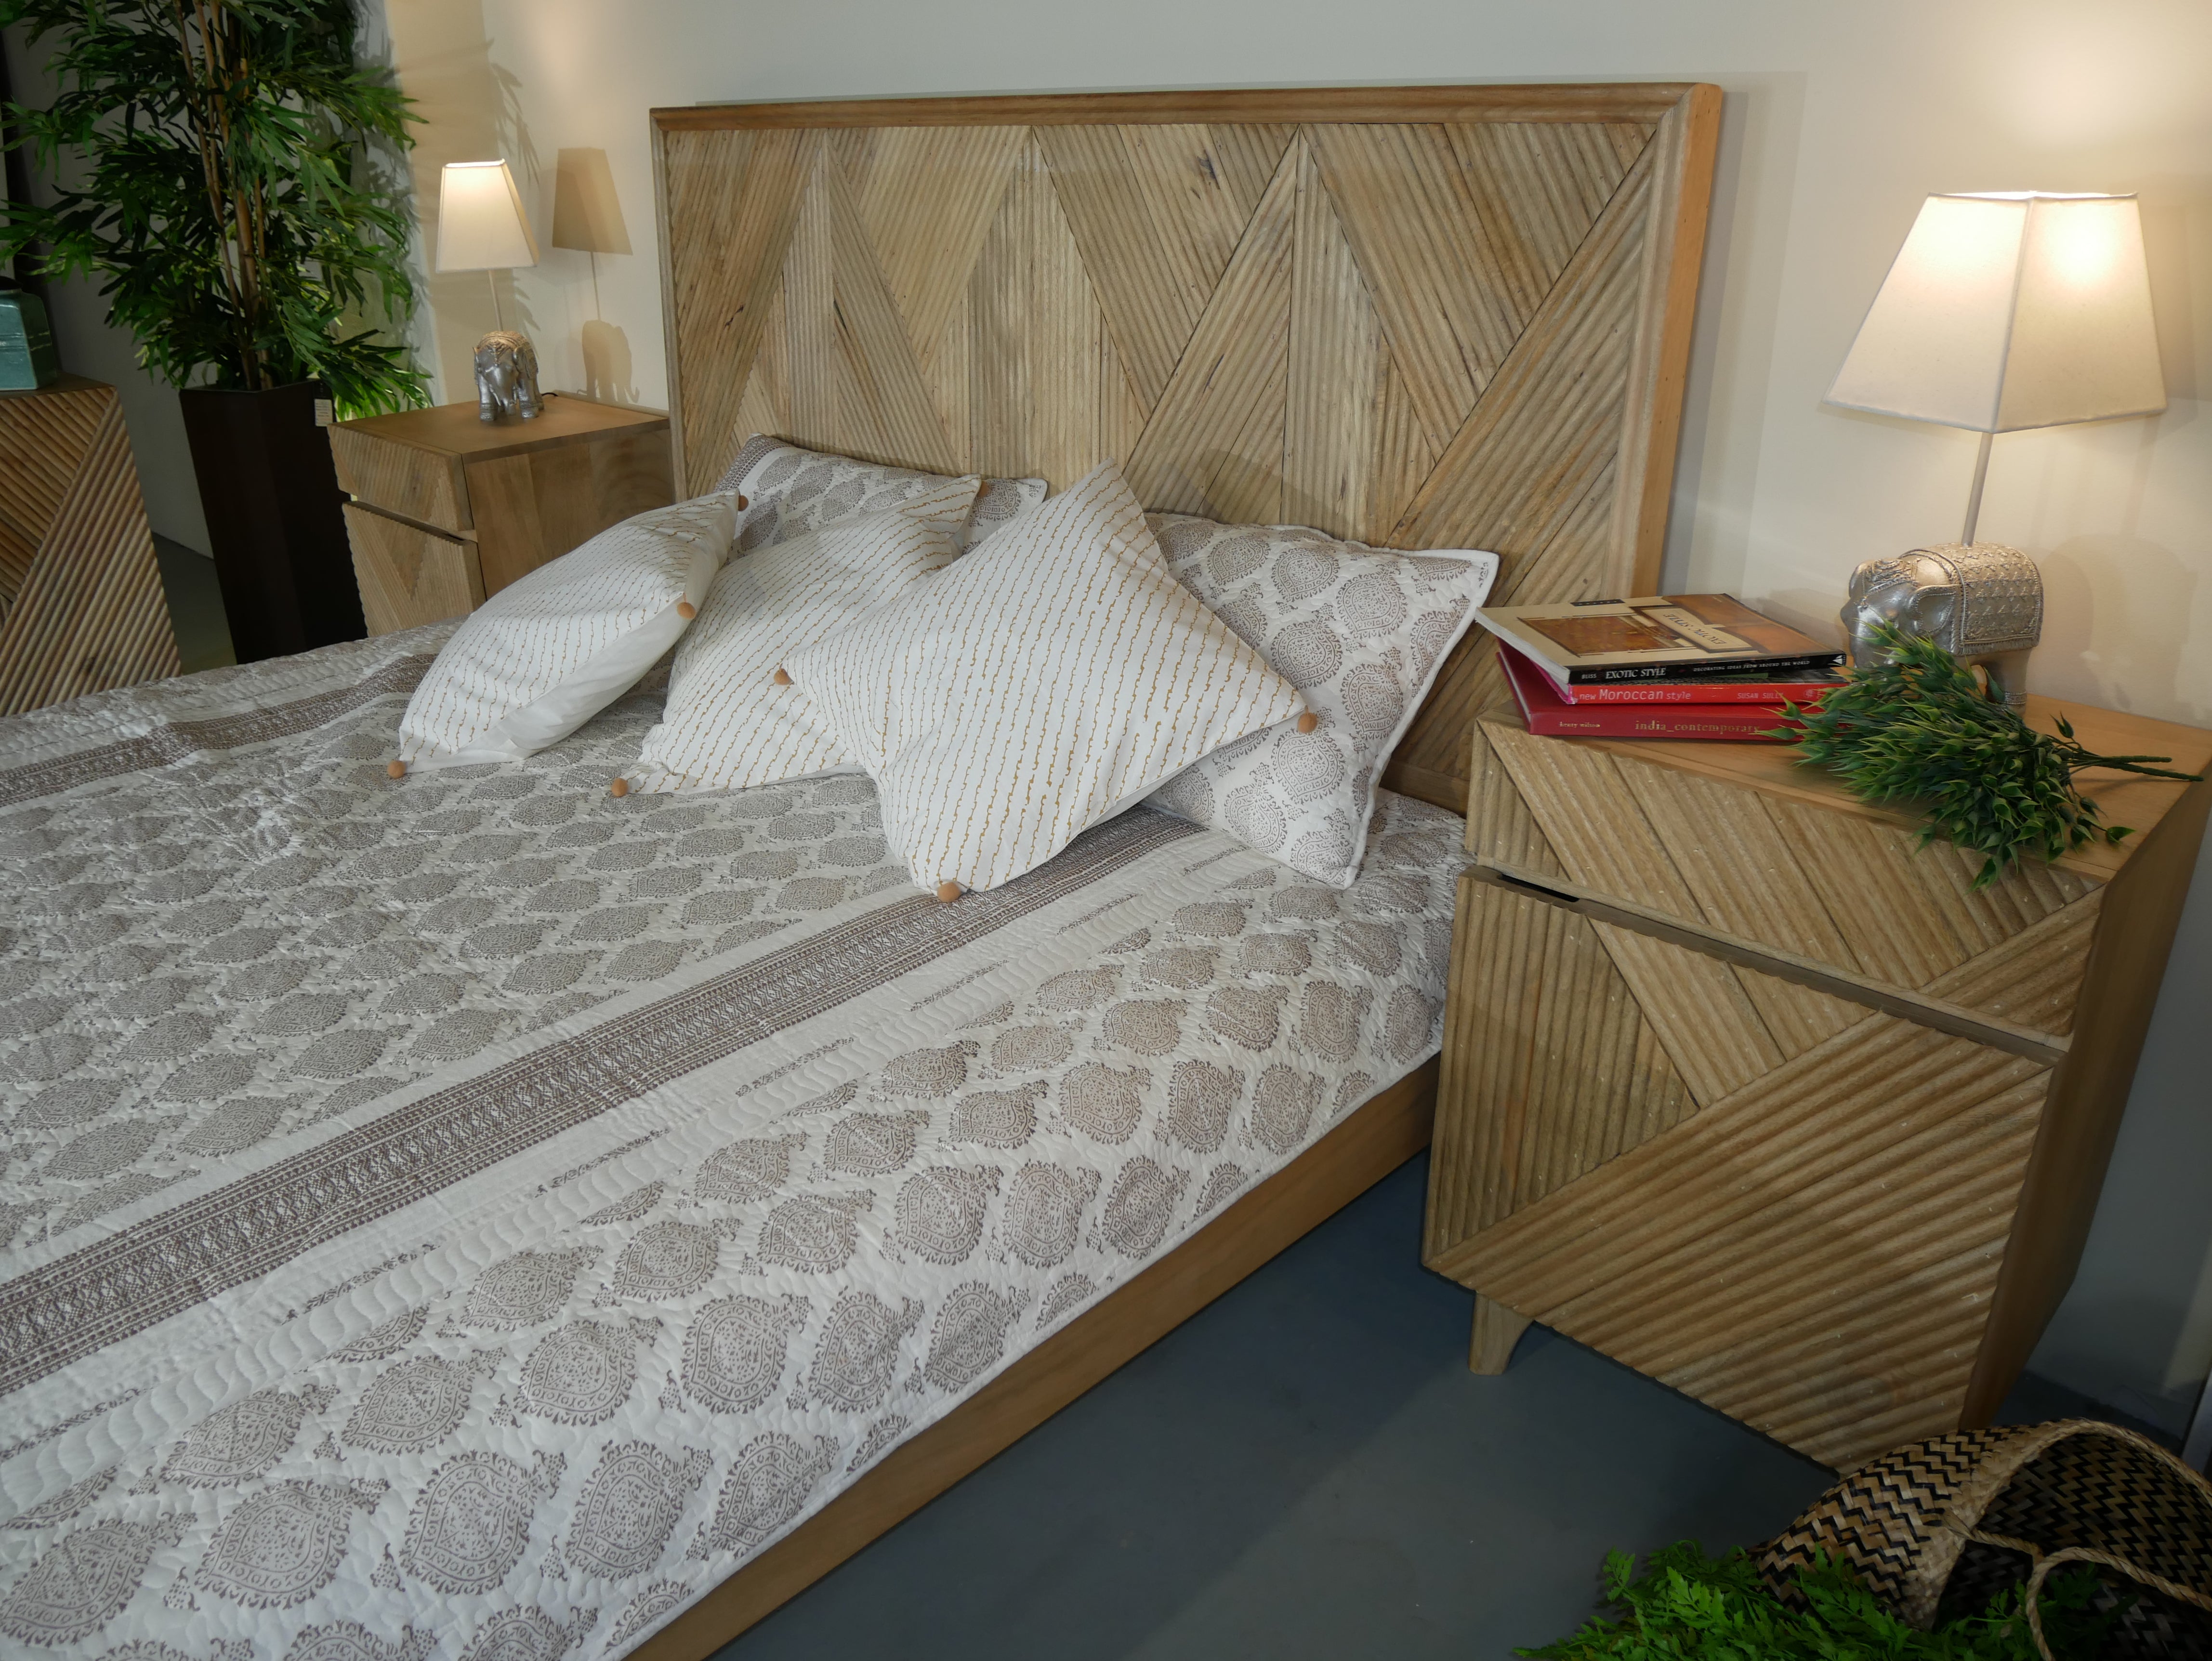 Beach, vintage wooden panel bed